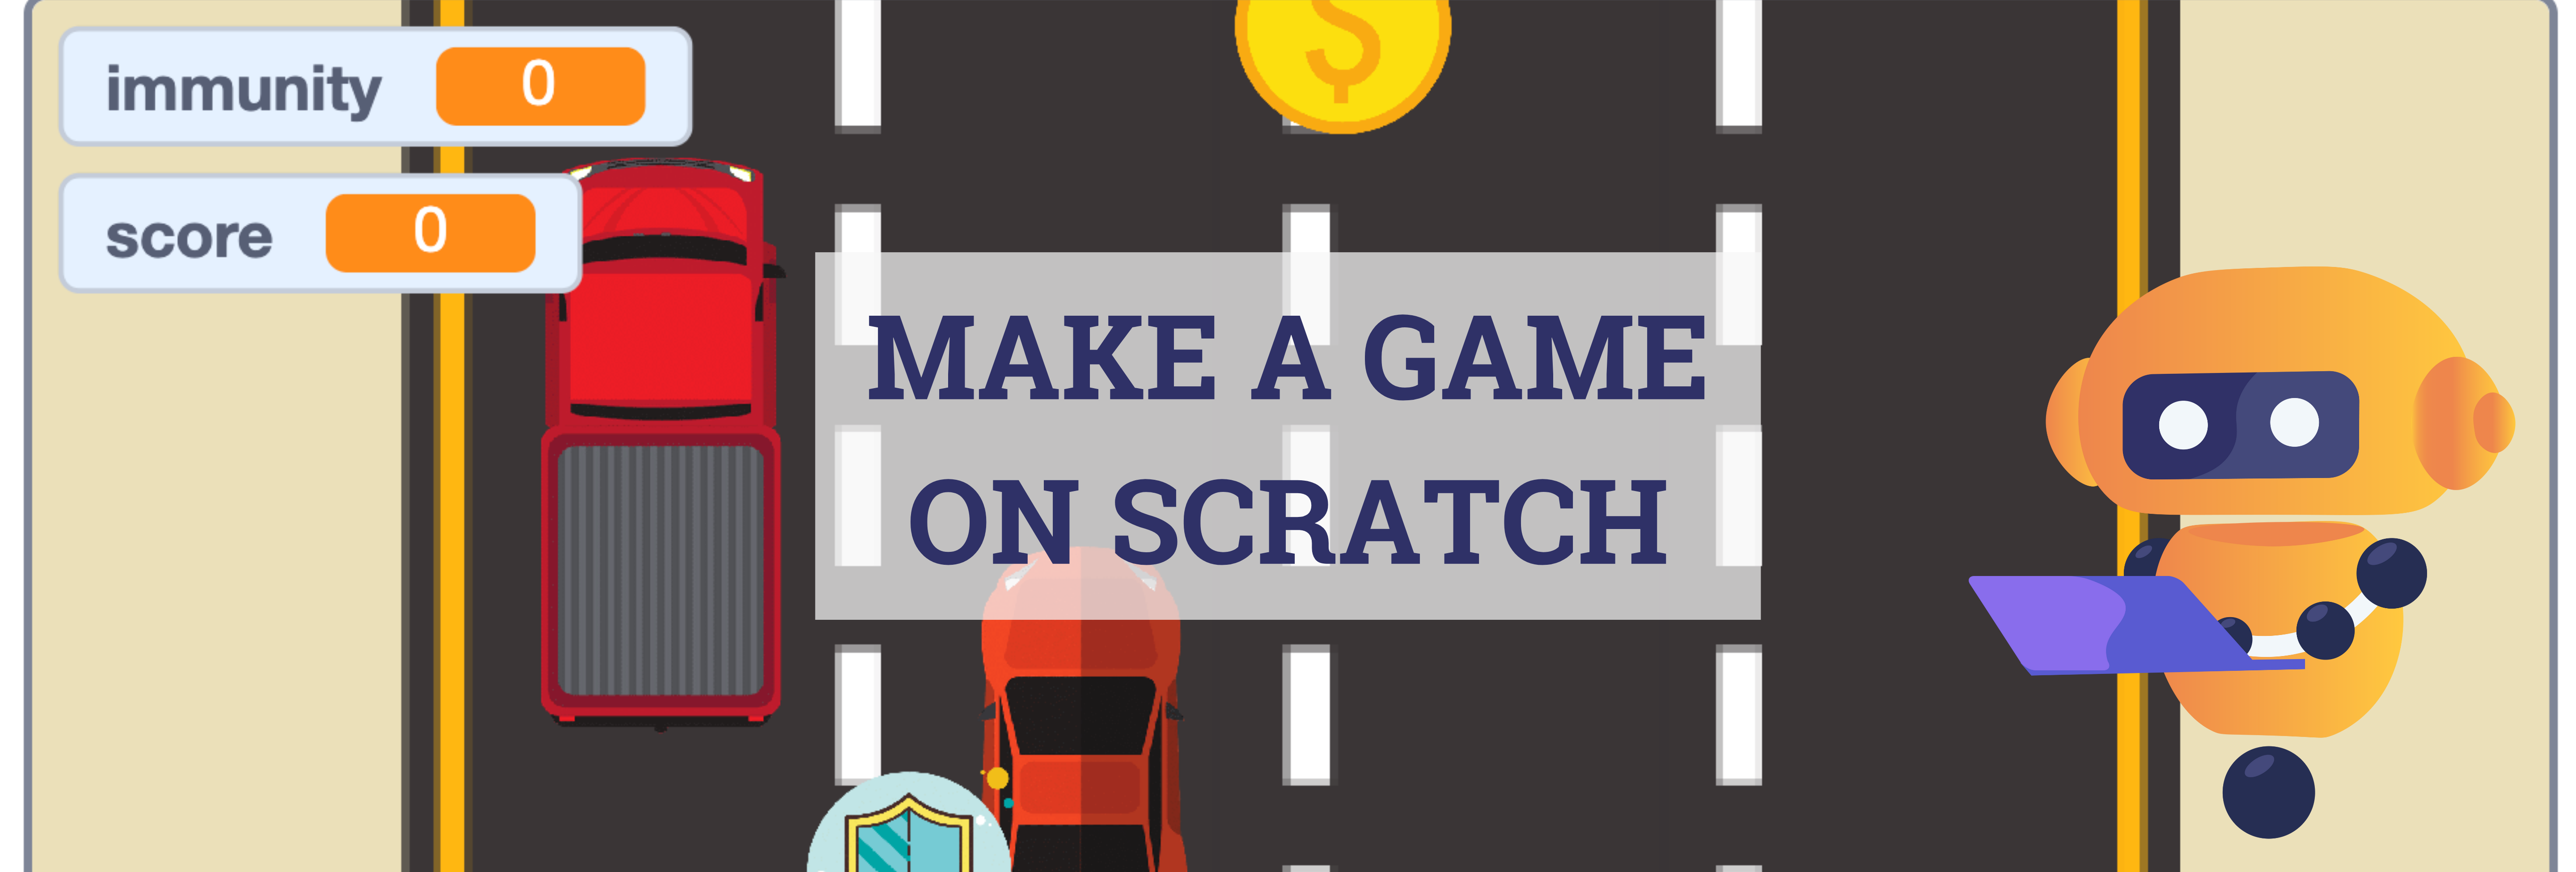 https://www.inspiritscholars.com/wp-content/uploads/2022/01/how-to-make-a-game-on-scratch.png